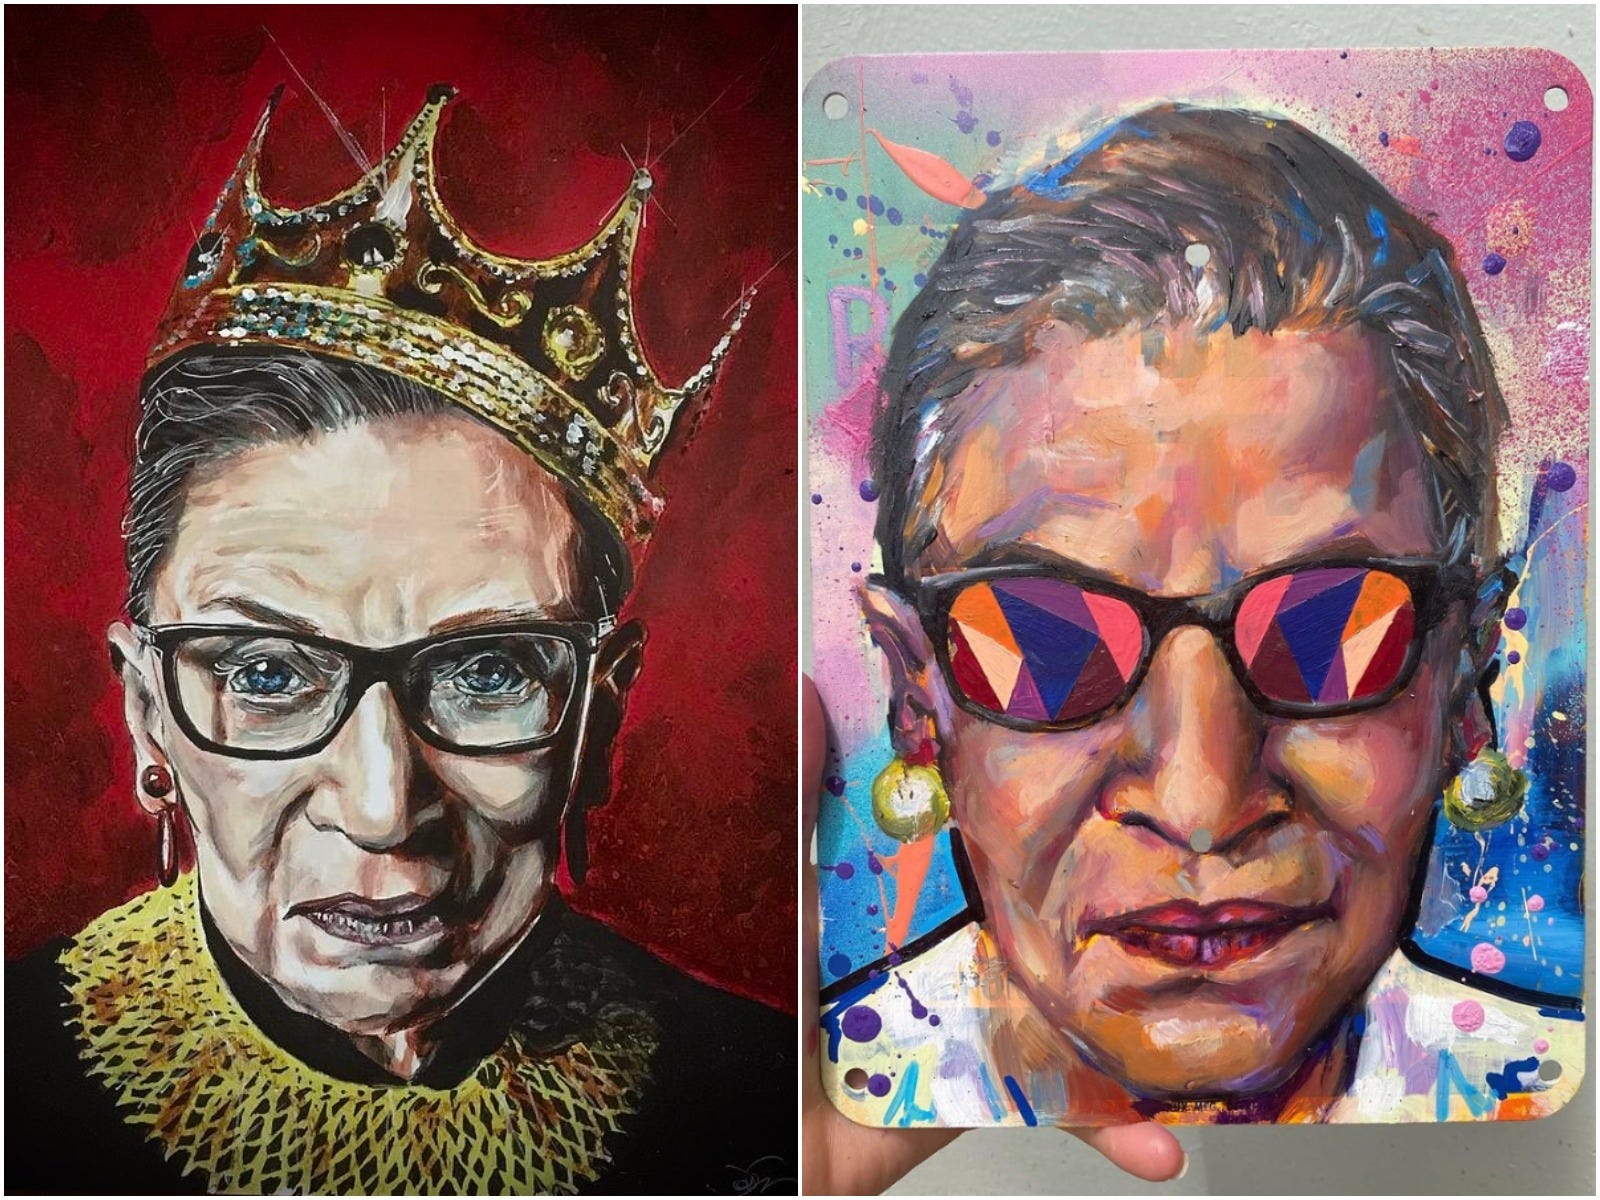 Artists told Insider what Ruth Bader Ginsburg meant to them.